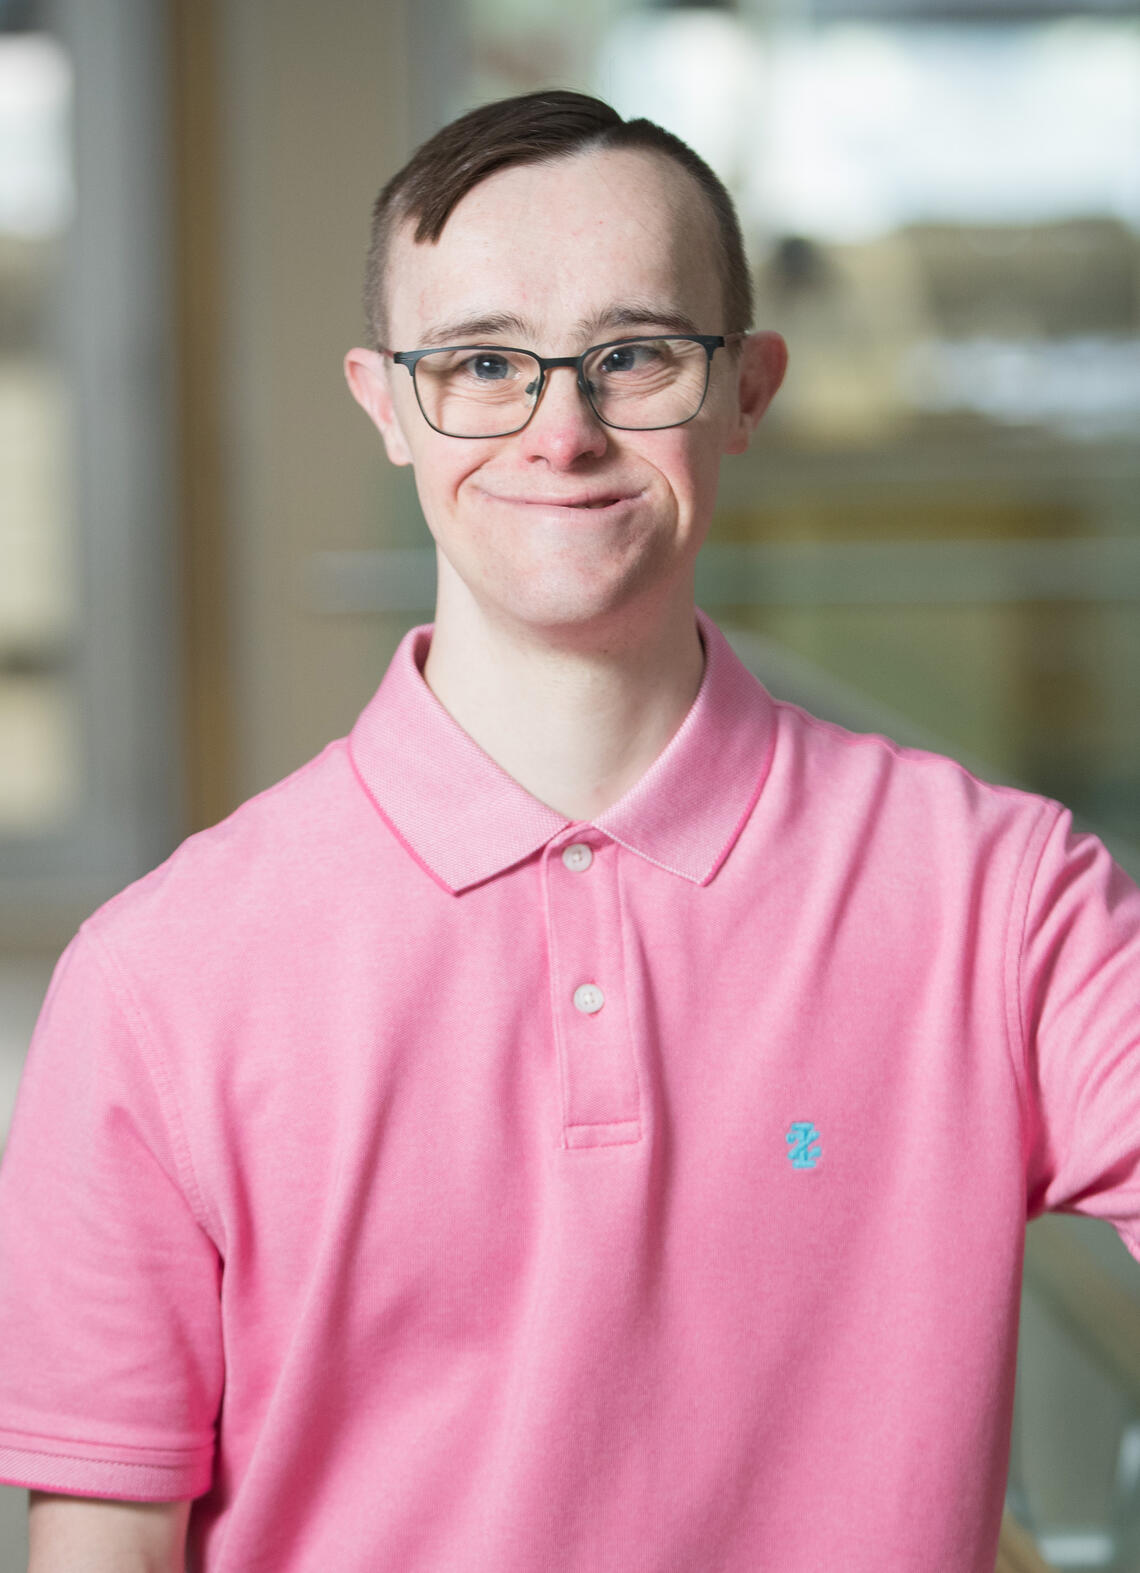 A man wearing a pink shirt and glasses